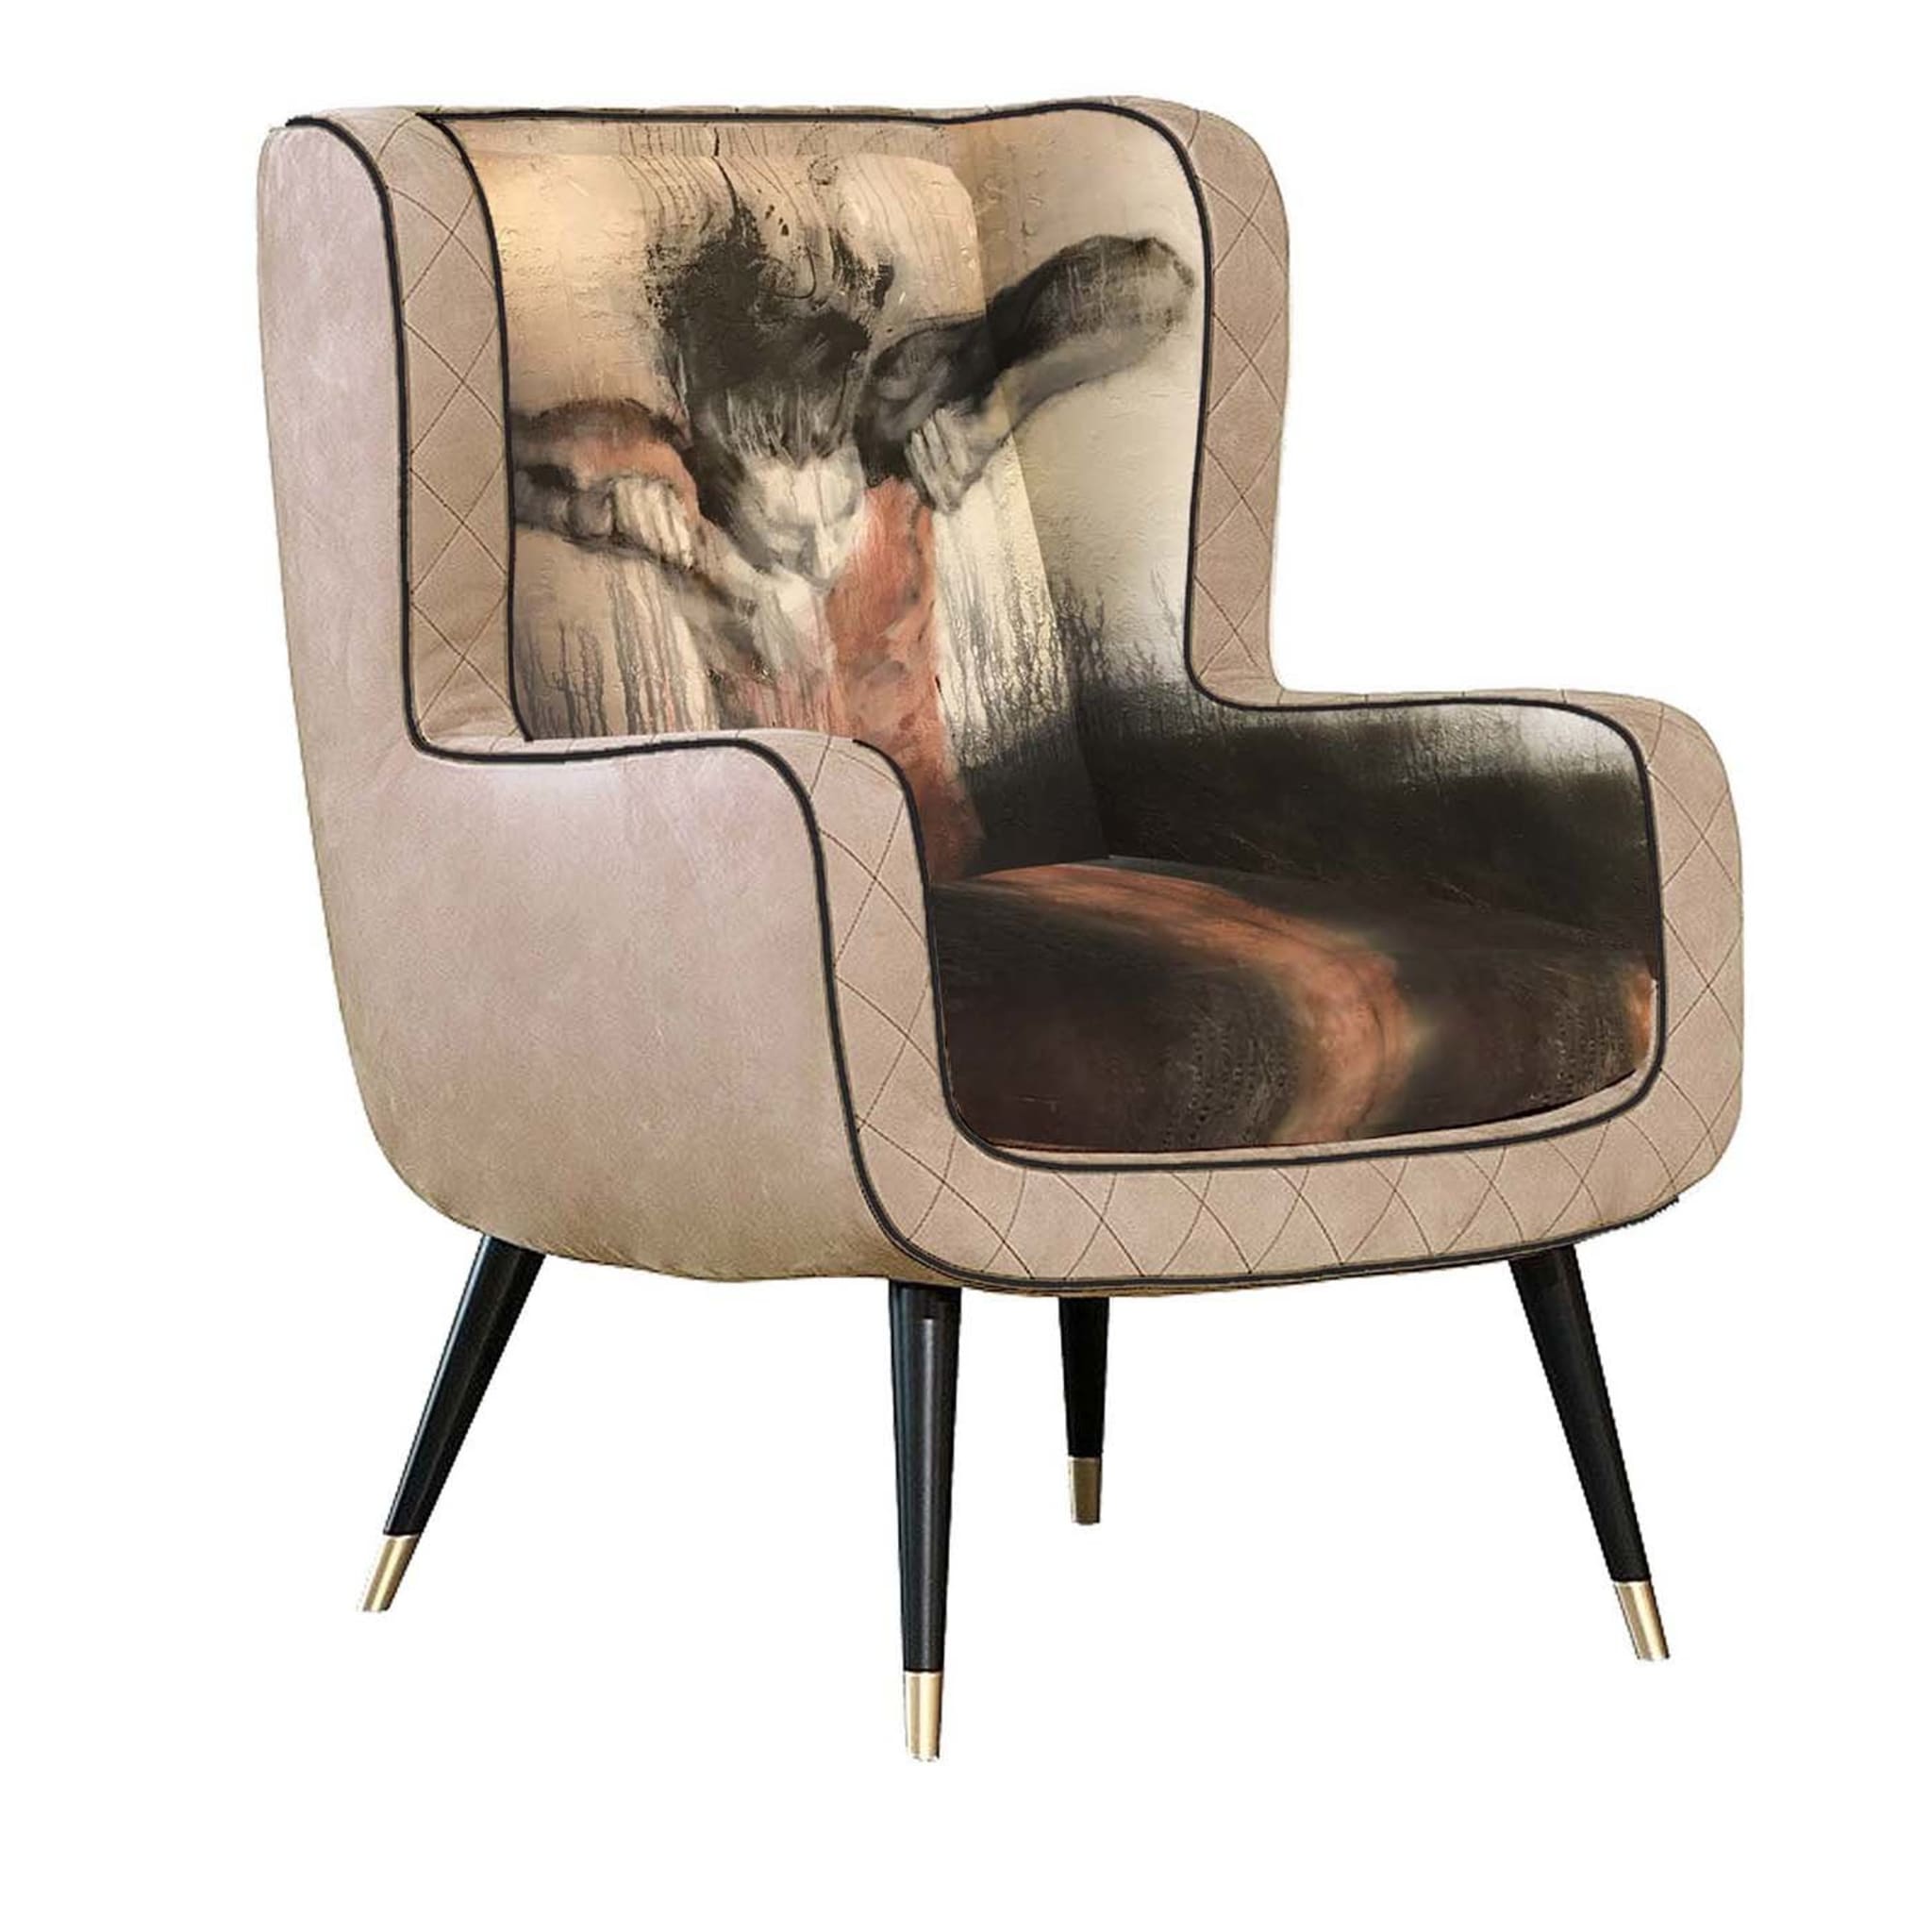 Stevie Armchair by Sergio Consonni and Pier Toffoletti - Main view